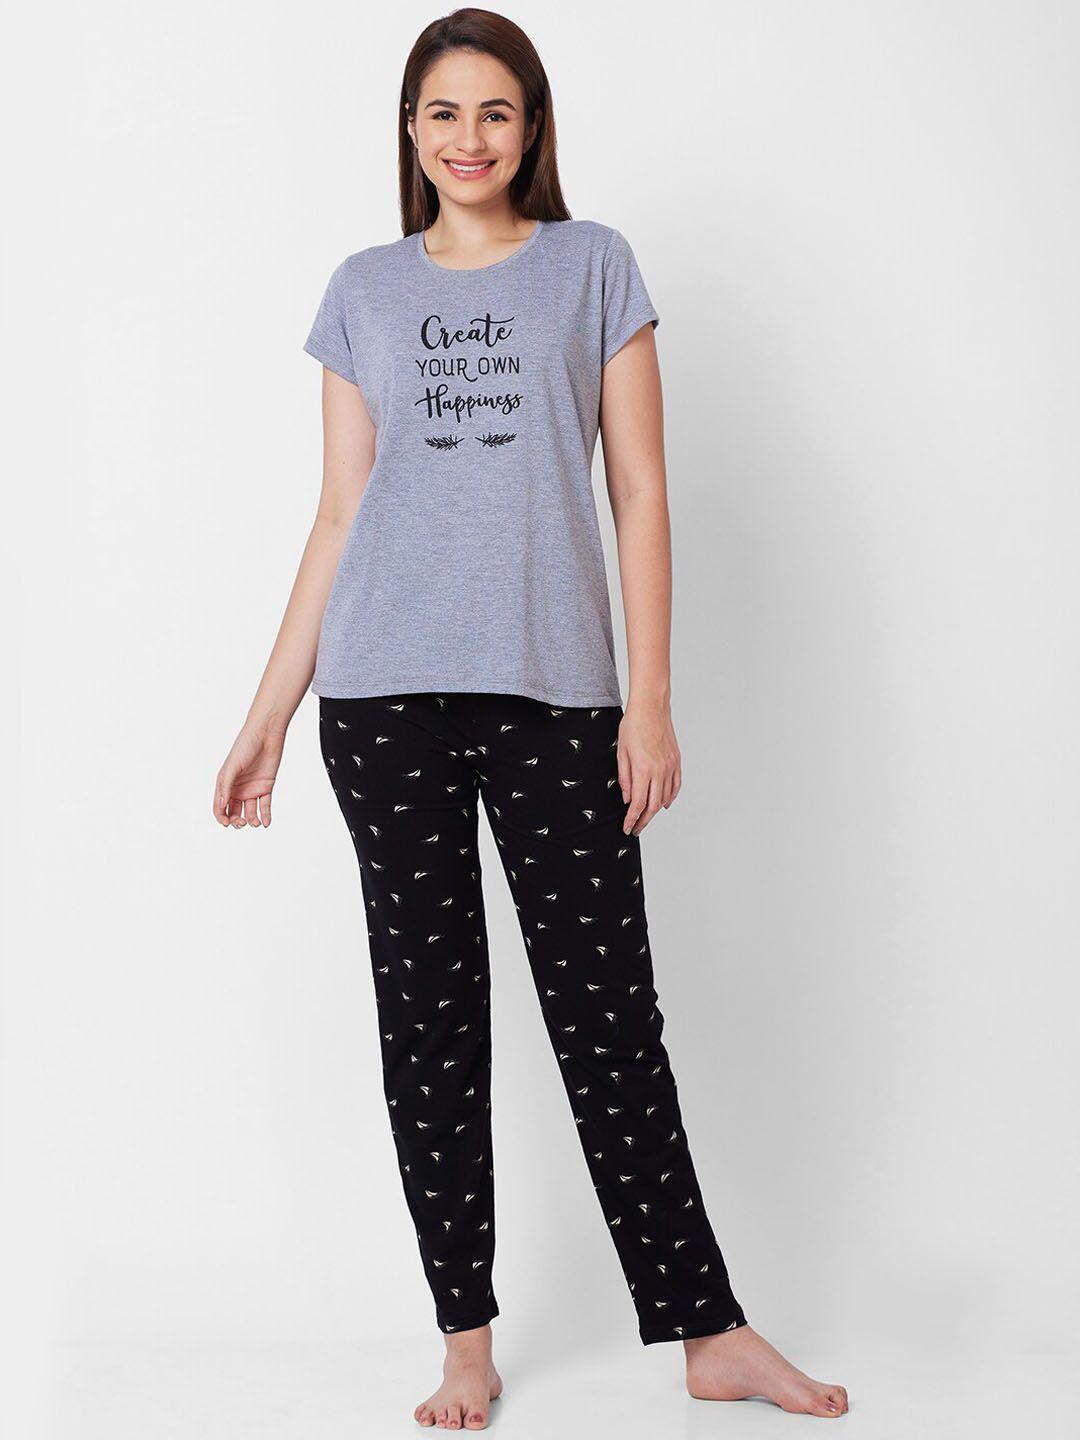 juliet-typography-printed-pure-cotton-night-suit